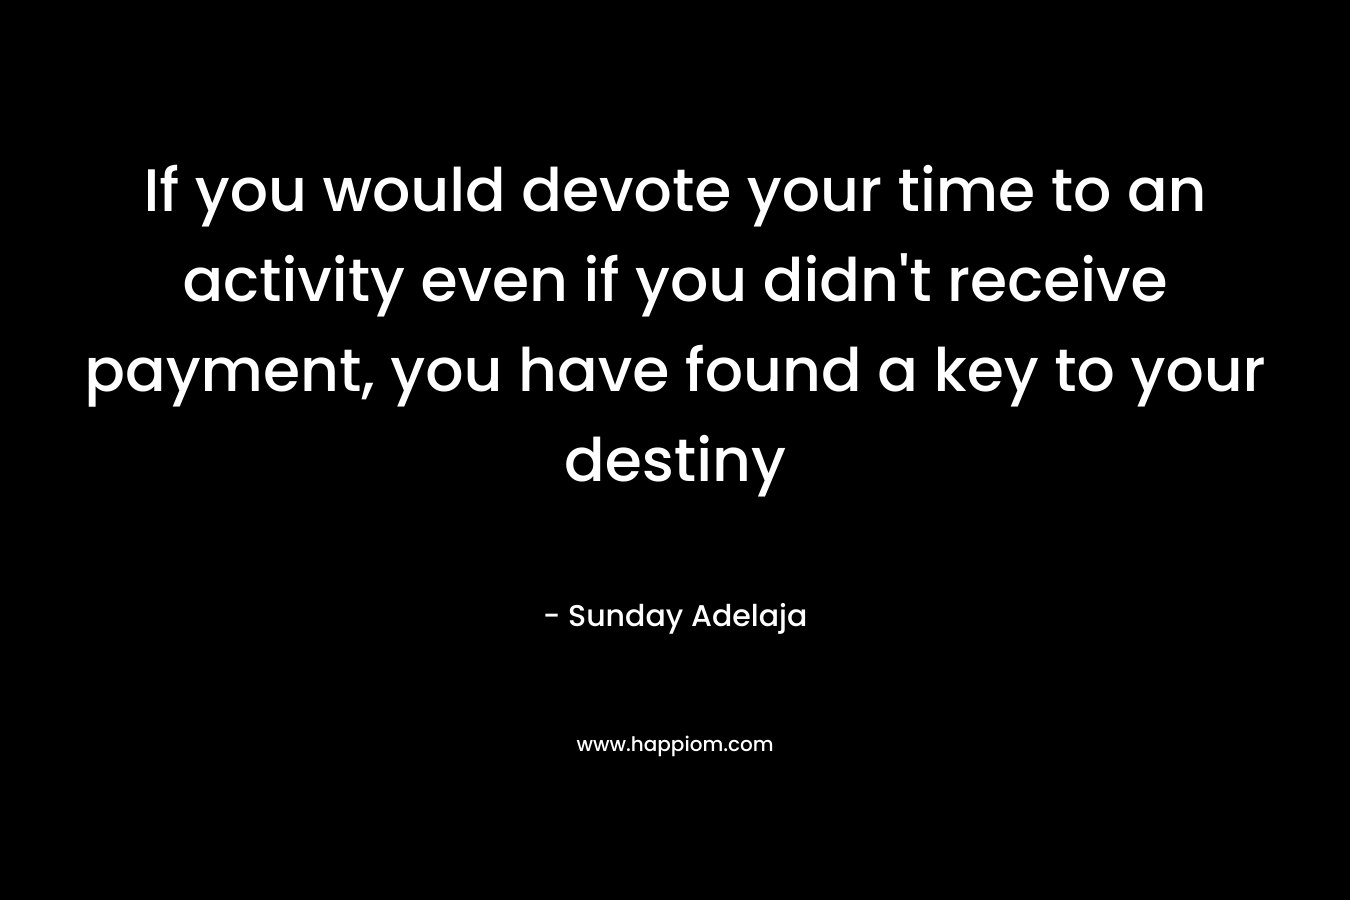 If you would devote your time to an activity even if you didn't receive payment, you have found a key to your destiny